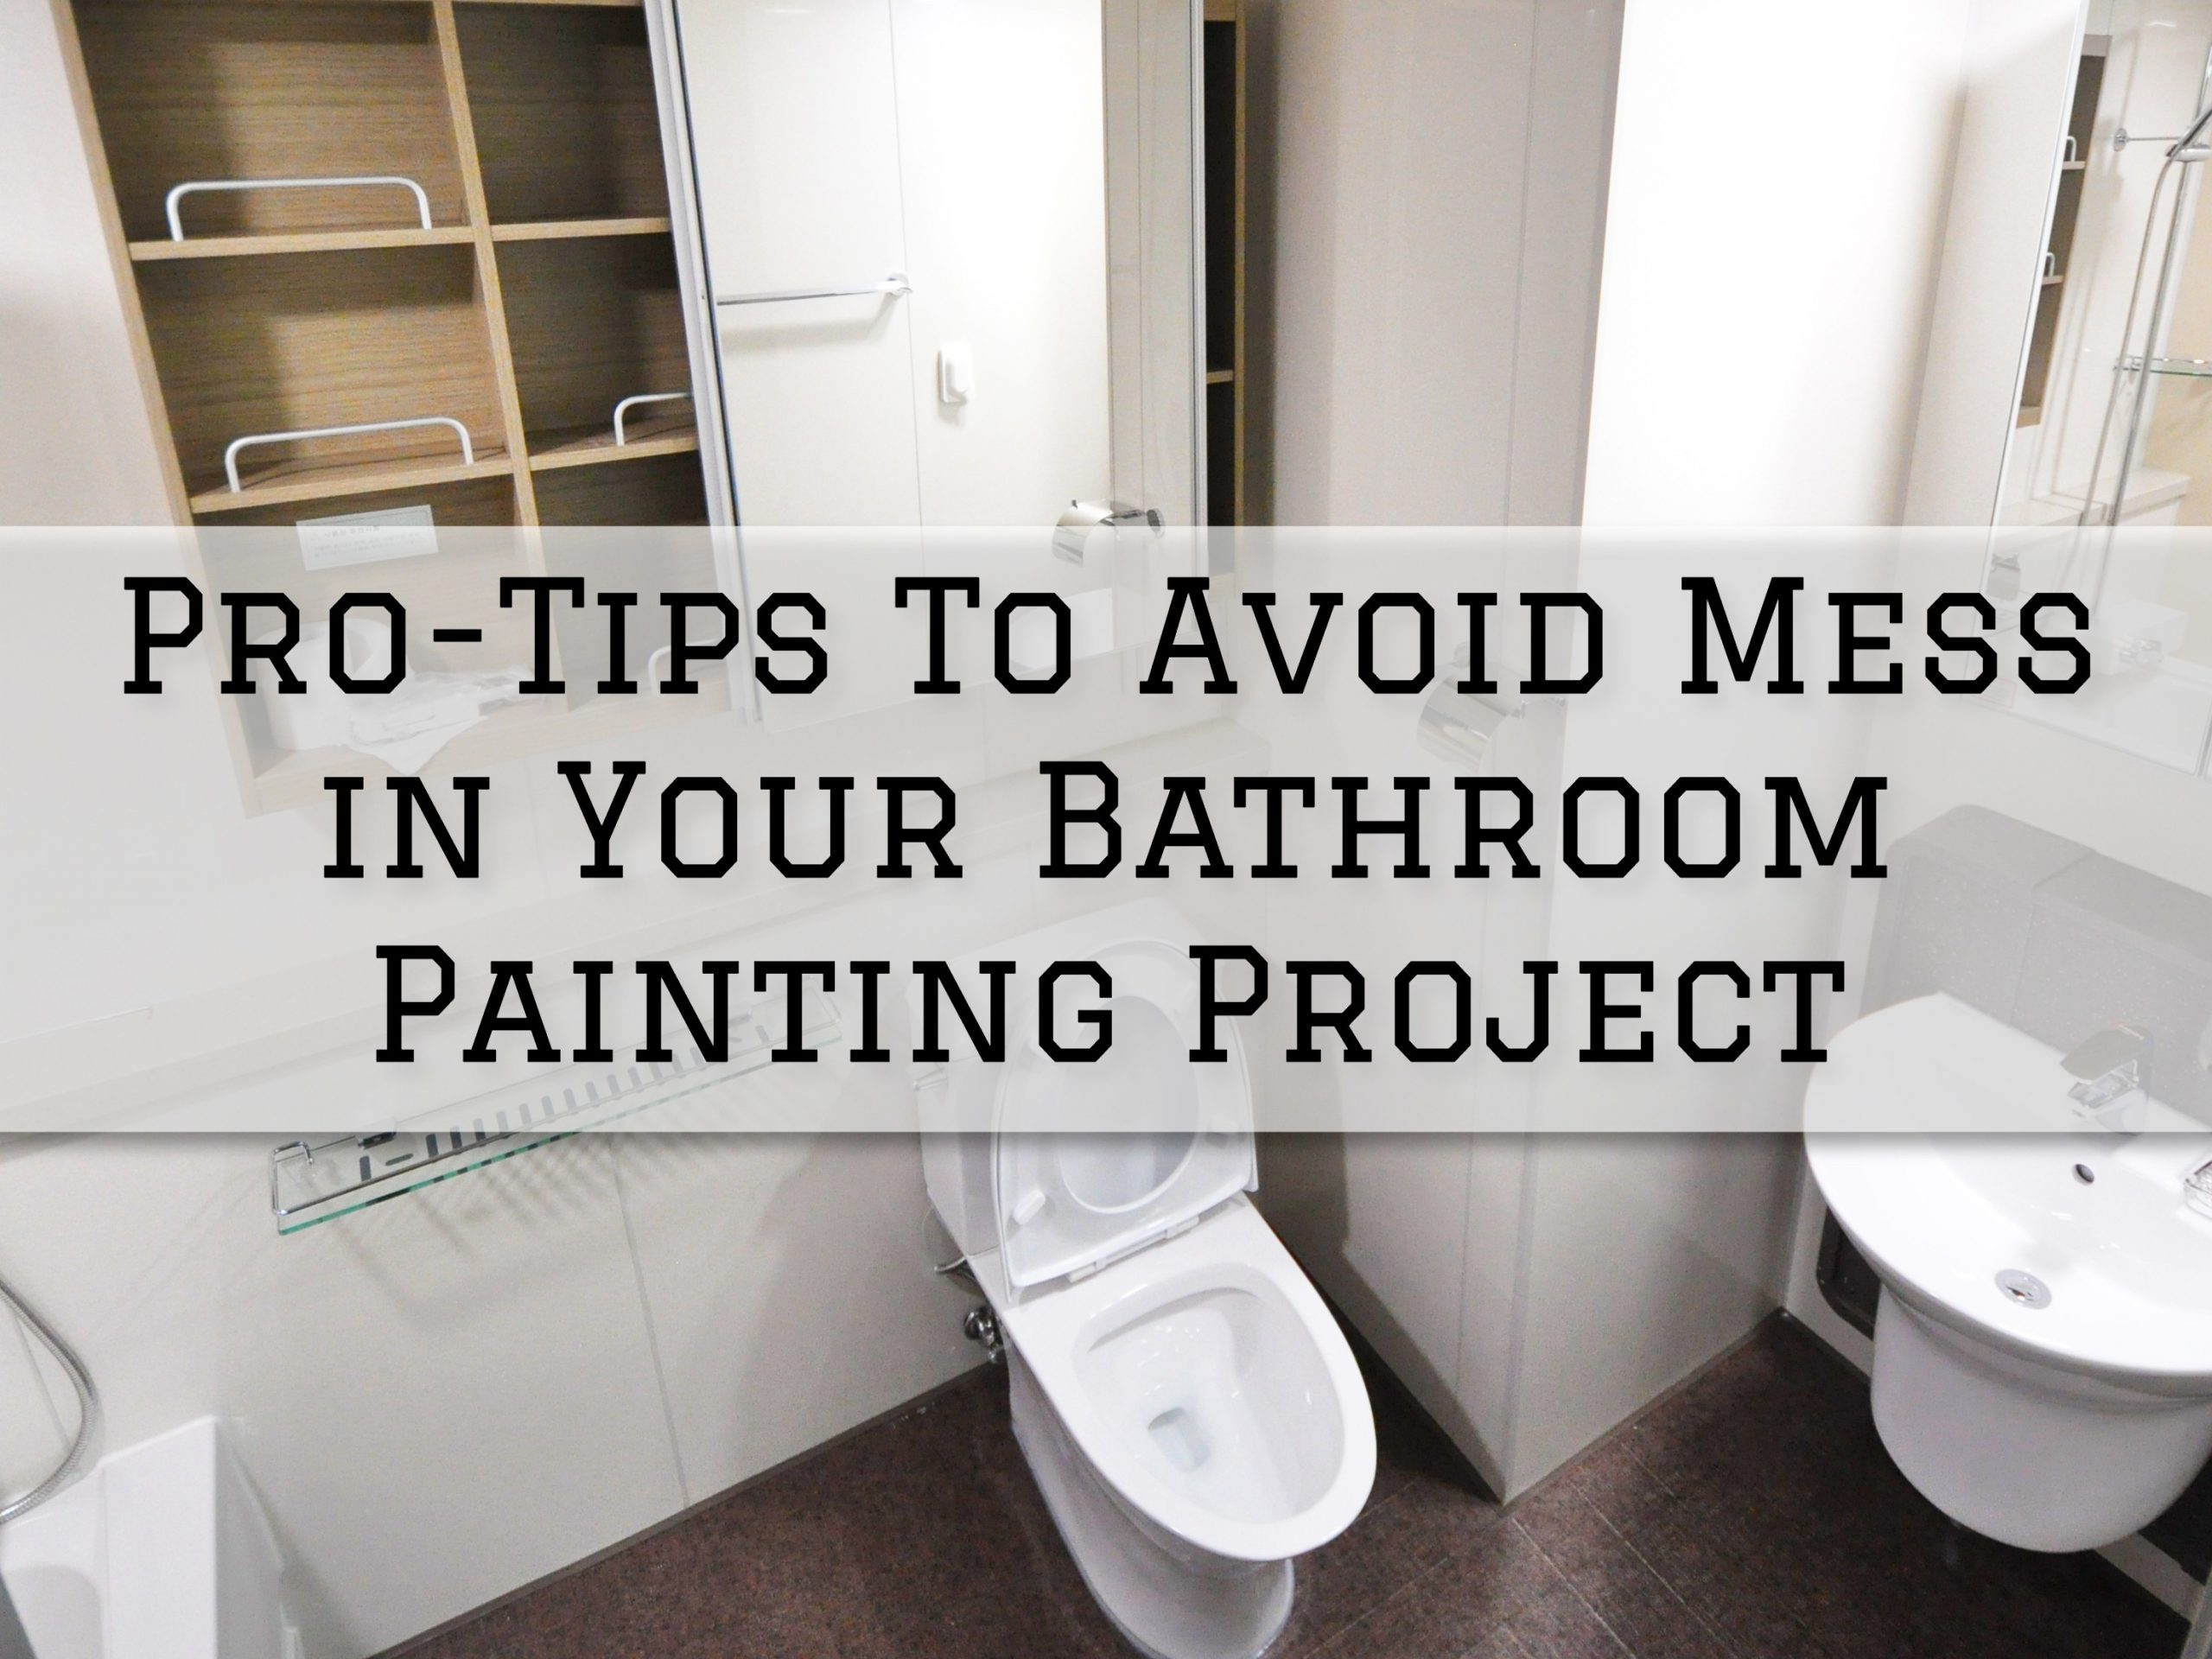 2022-09-22 Serious Business Painting Oldham County Pro-Tips To Avoid Mess in Your Bathroom Painting